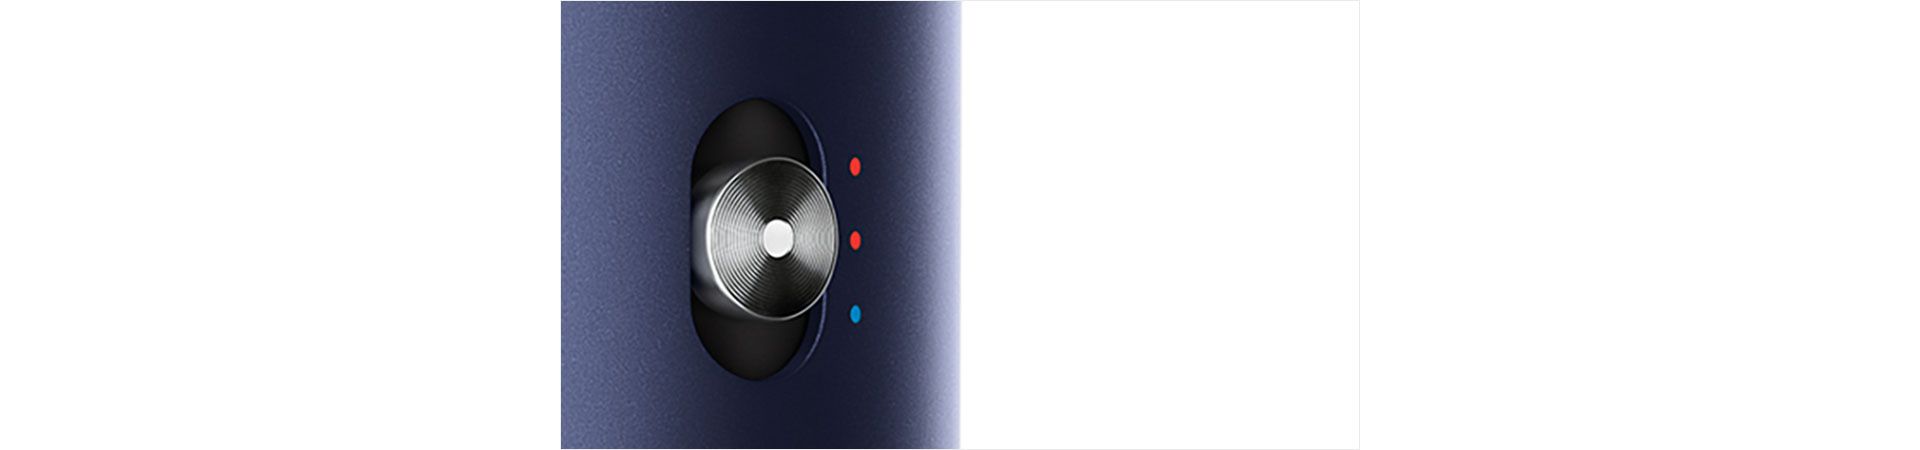 Close-up of heat control button on Dyson Airwrap